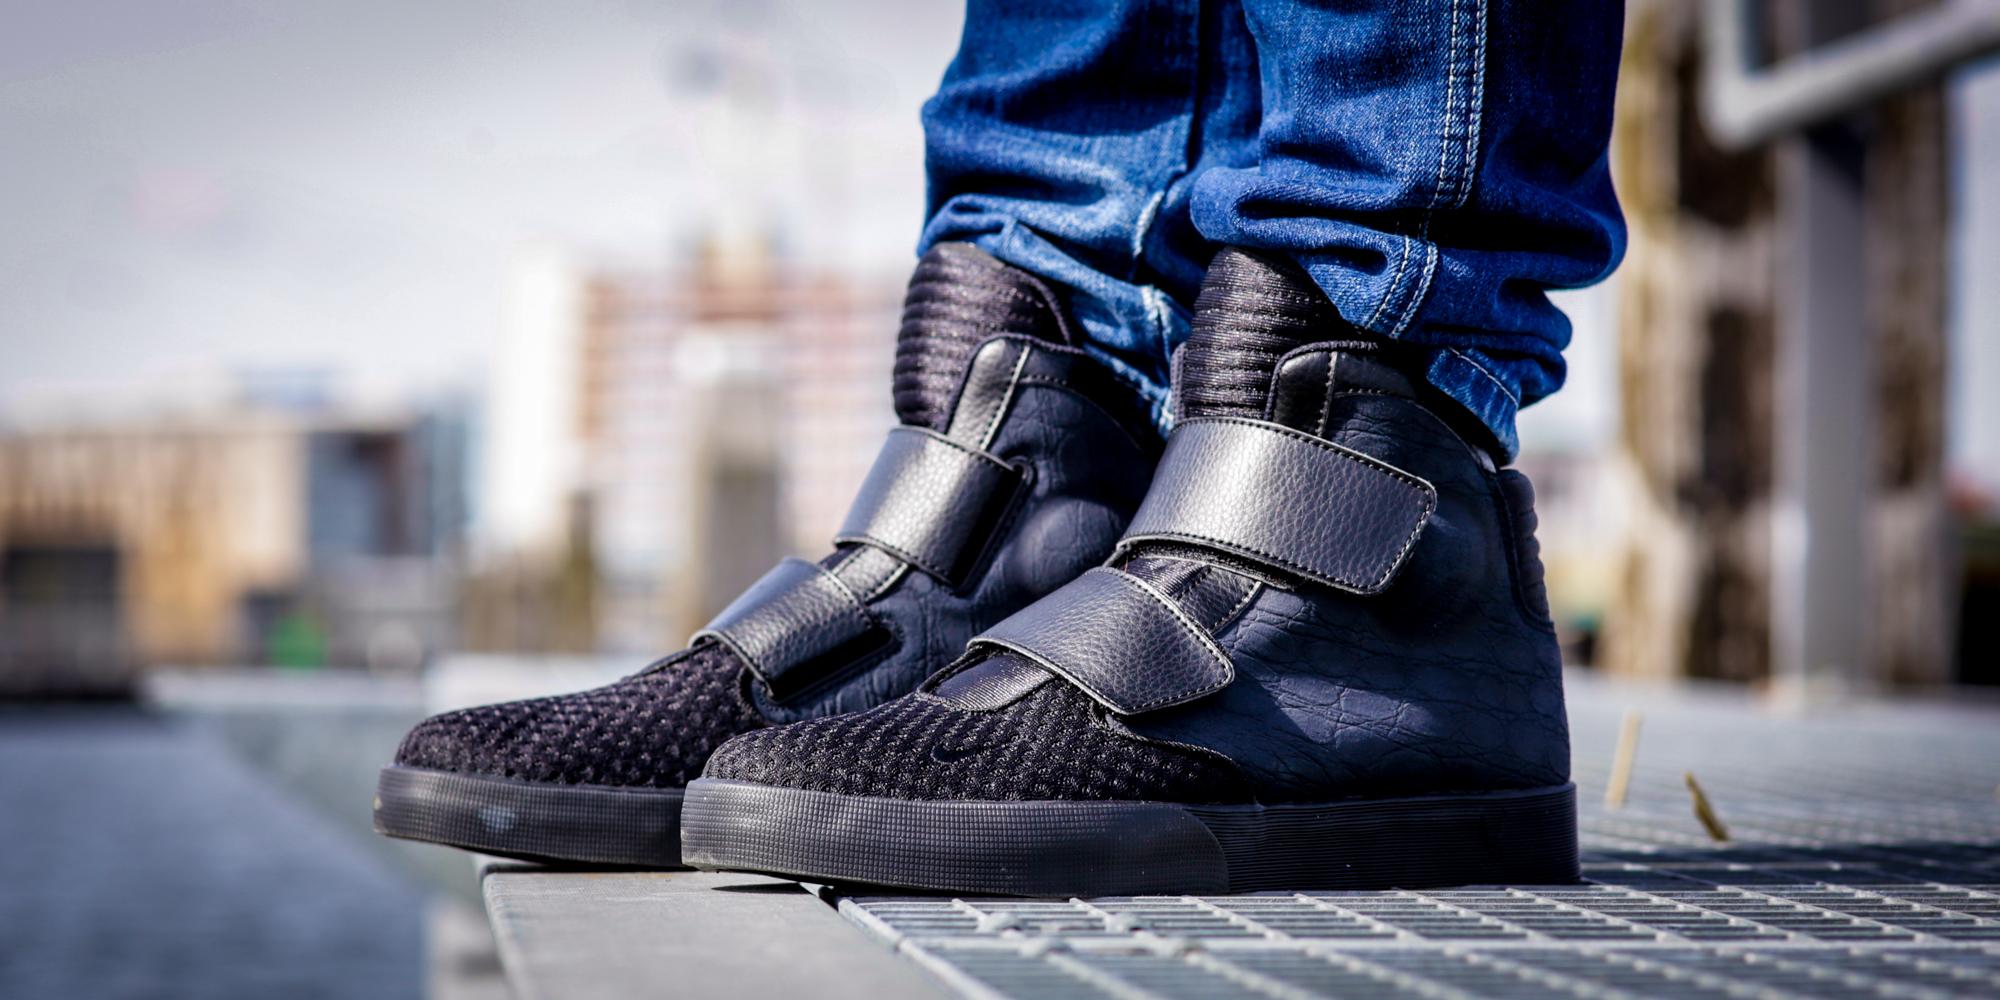 mejilla mientras tanto Fangoso Foot Locker EU on Twitter: "The futuristic silhouette of the #Nike # Flystepper #2K3 is available in all-black http://t.co/mBw8ZHH3iD  http://t.co/fgfs28yp9c" / Twitter